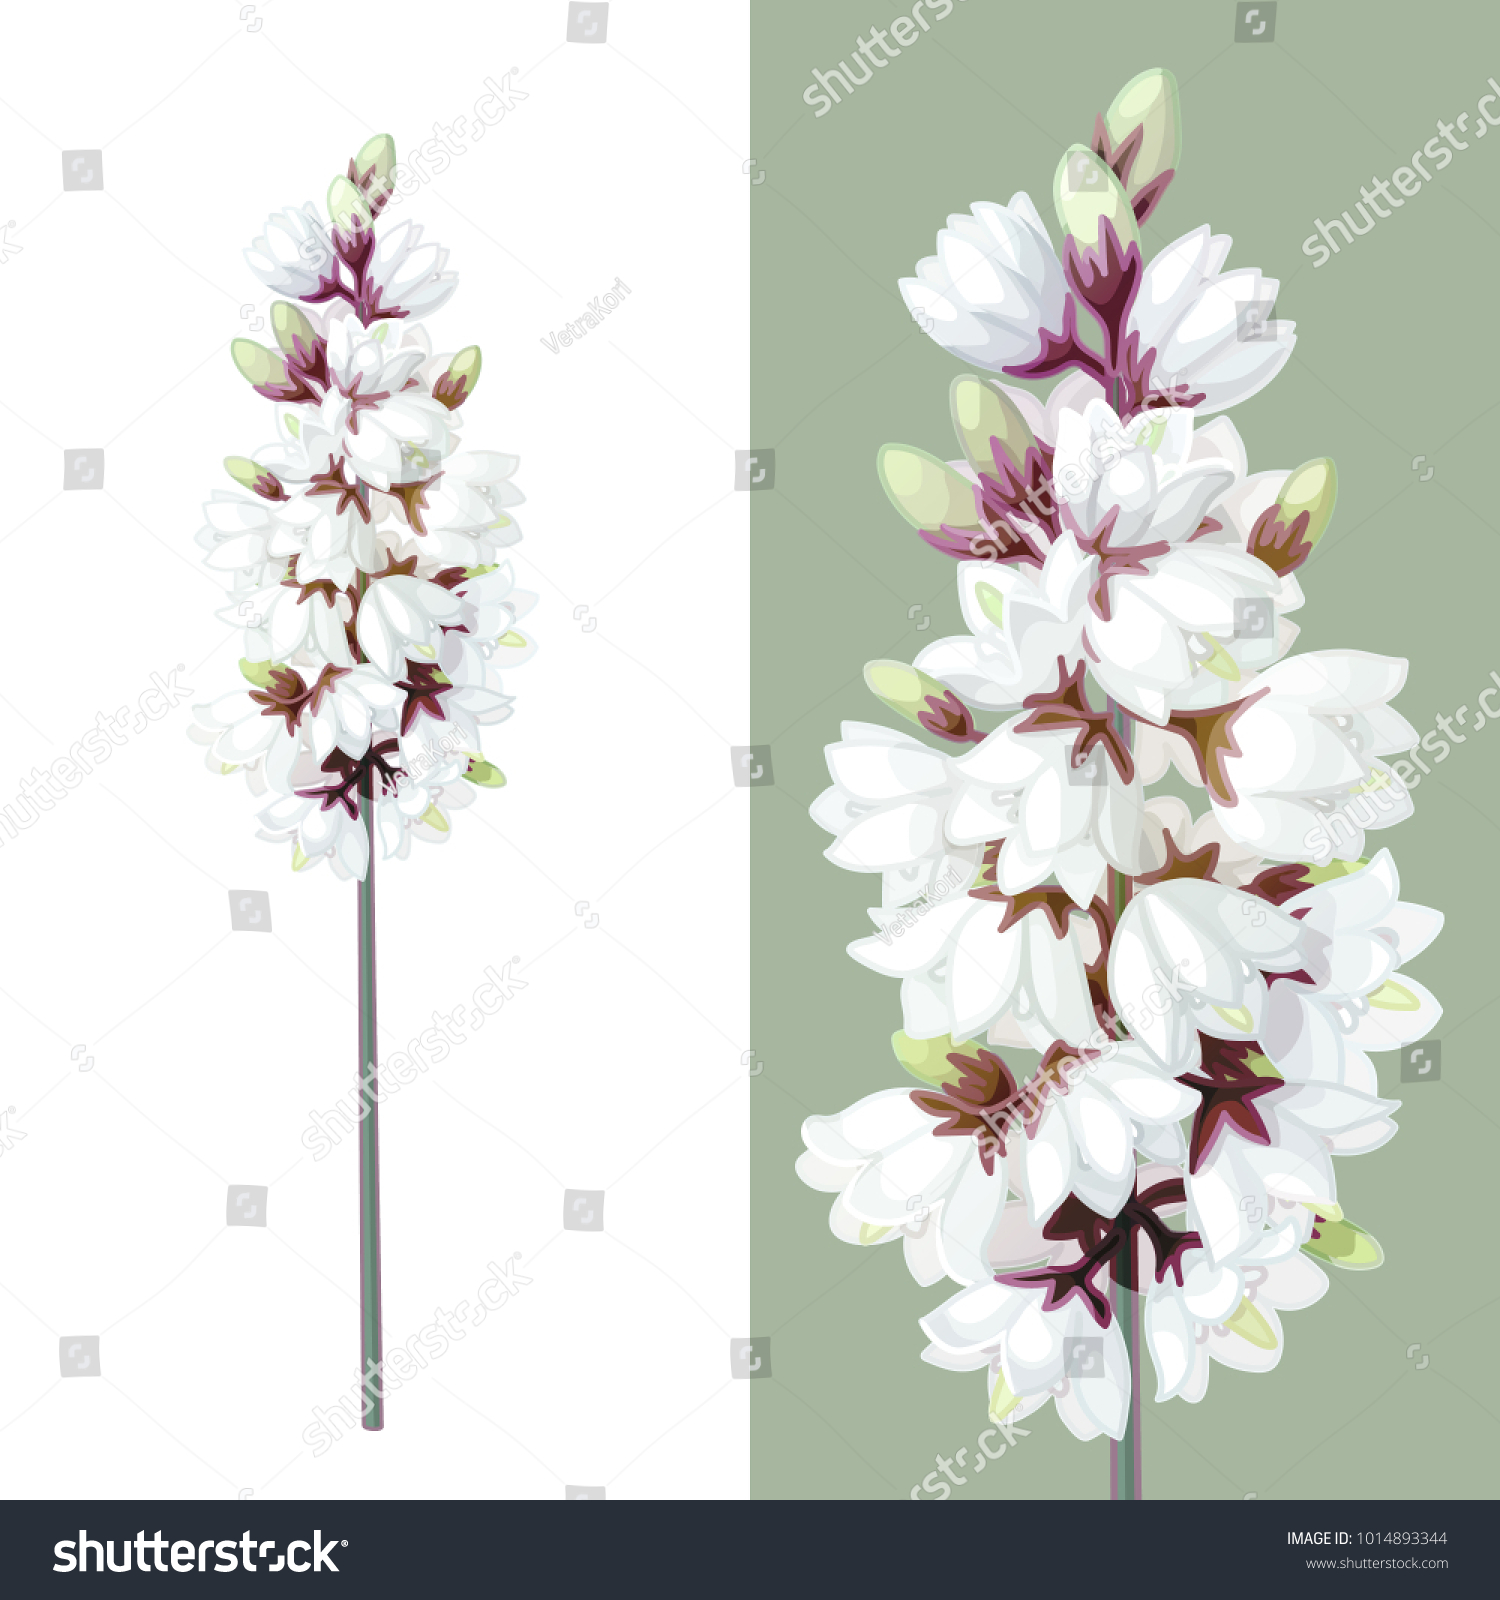 Vector Blooming Wild Yucca Flower Art Stock Vector Royalty Free 1014893344